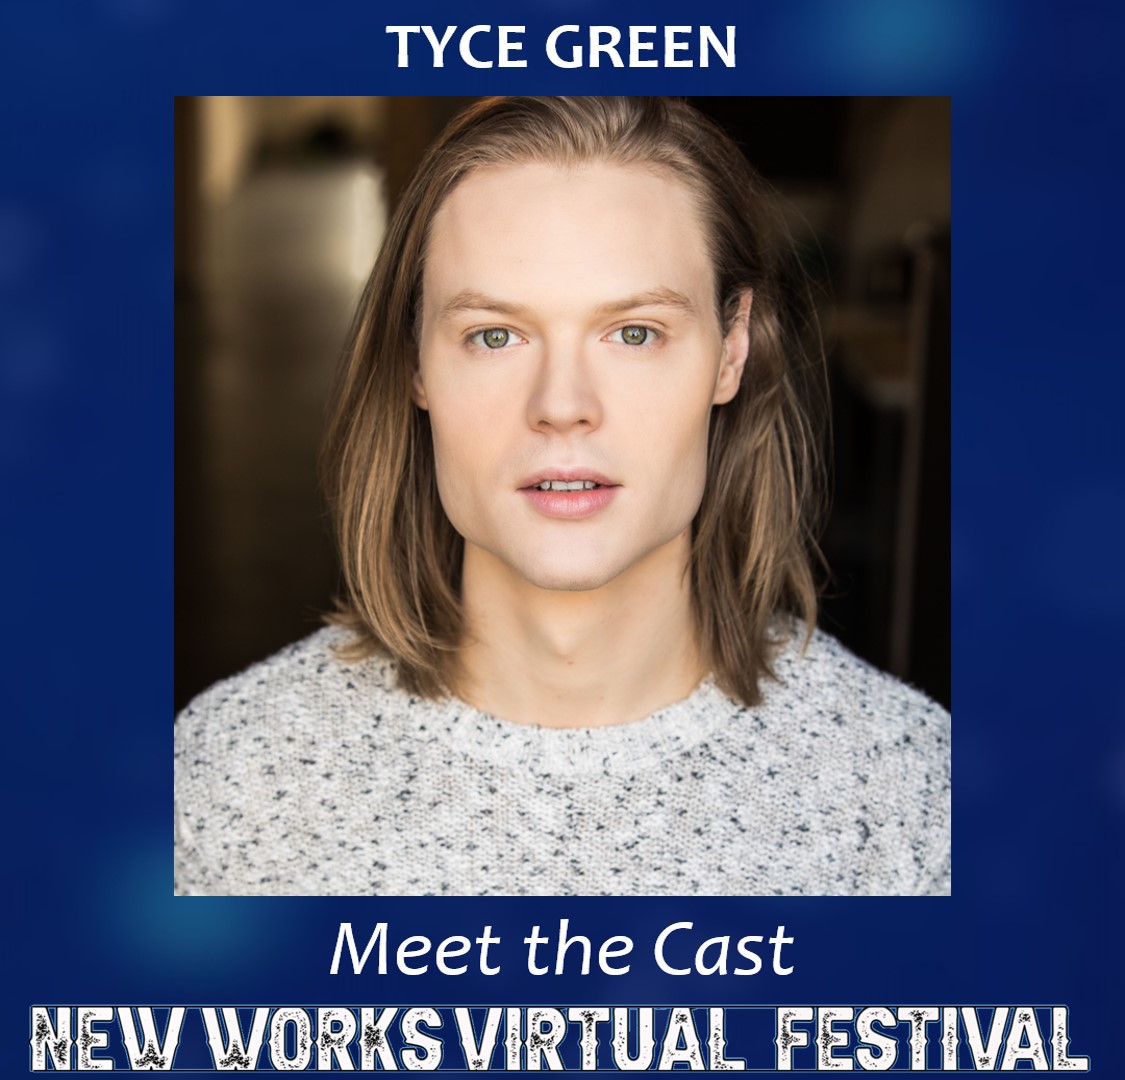 Meet @tyce from the cast of 'A Man with No Opinion.' by Kevin Wiczer! Stay tuned to learn more about the team of performers and creatives bringing this star-studded festival to life. #nwvfest #newworksvirtualfestival #meethecast